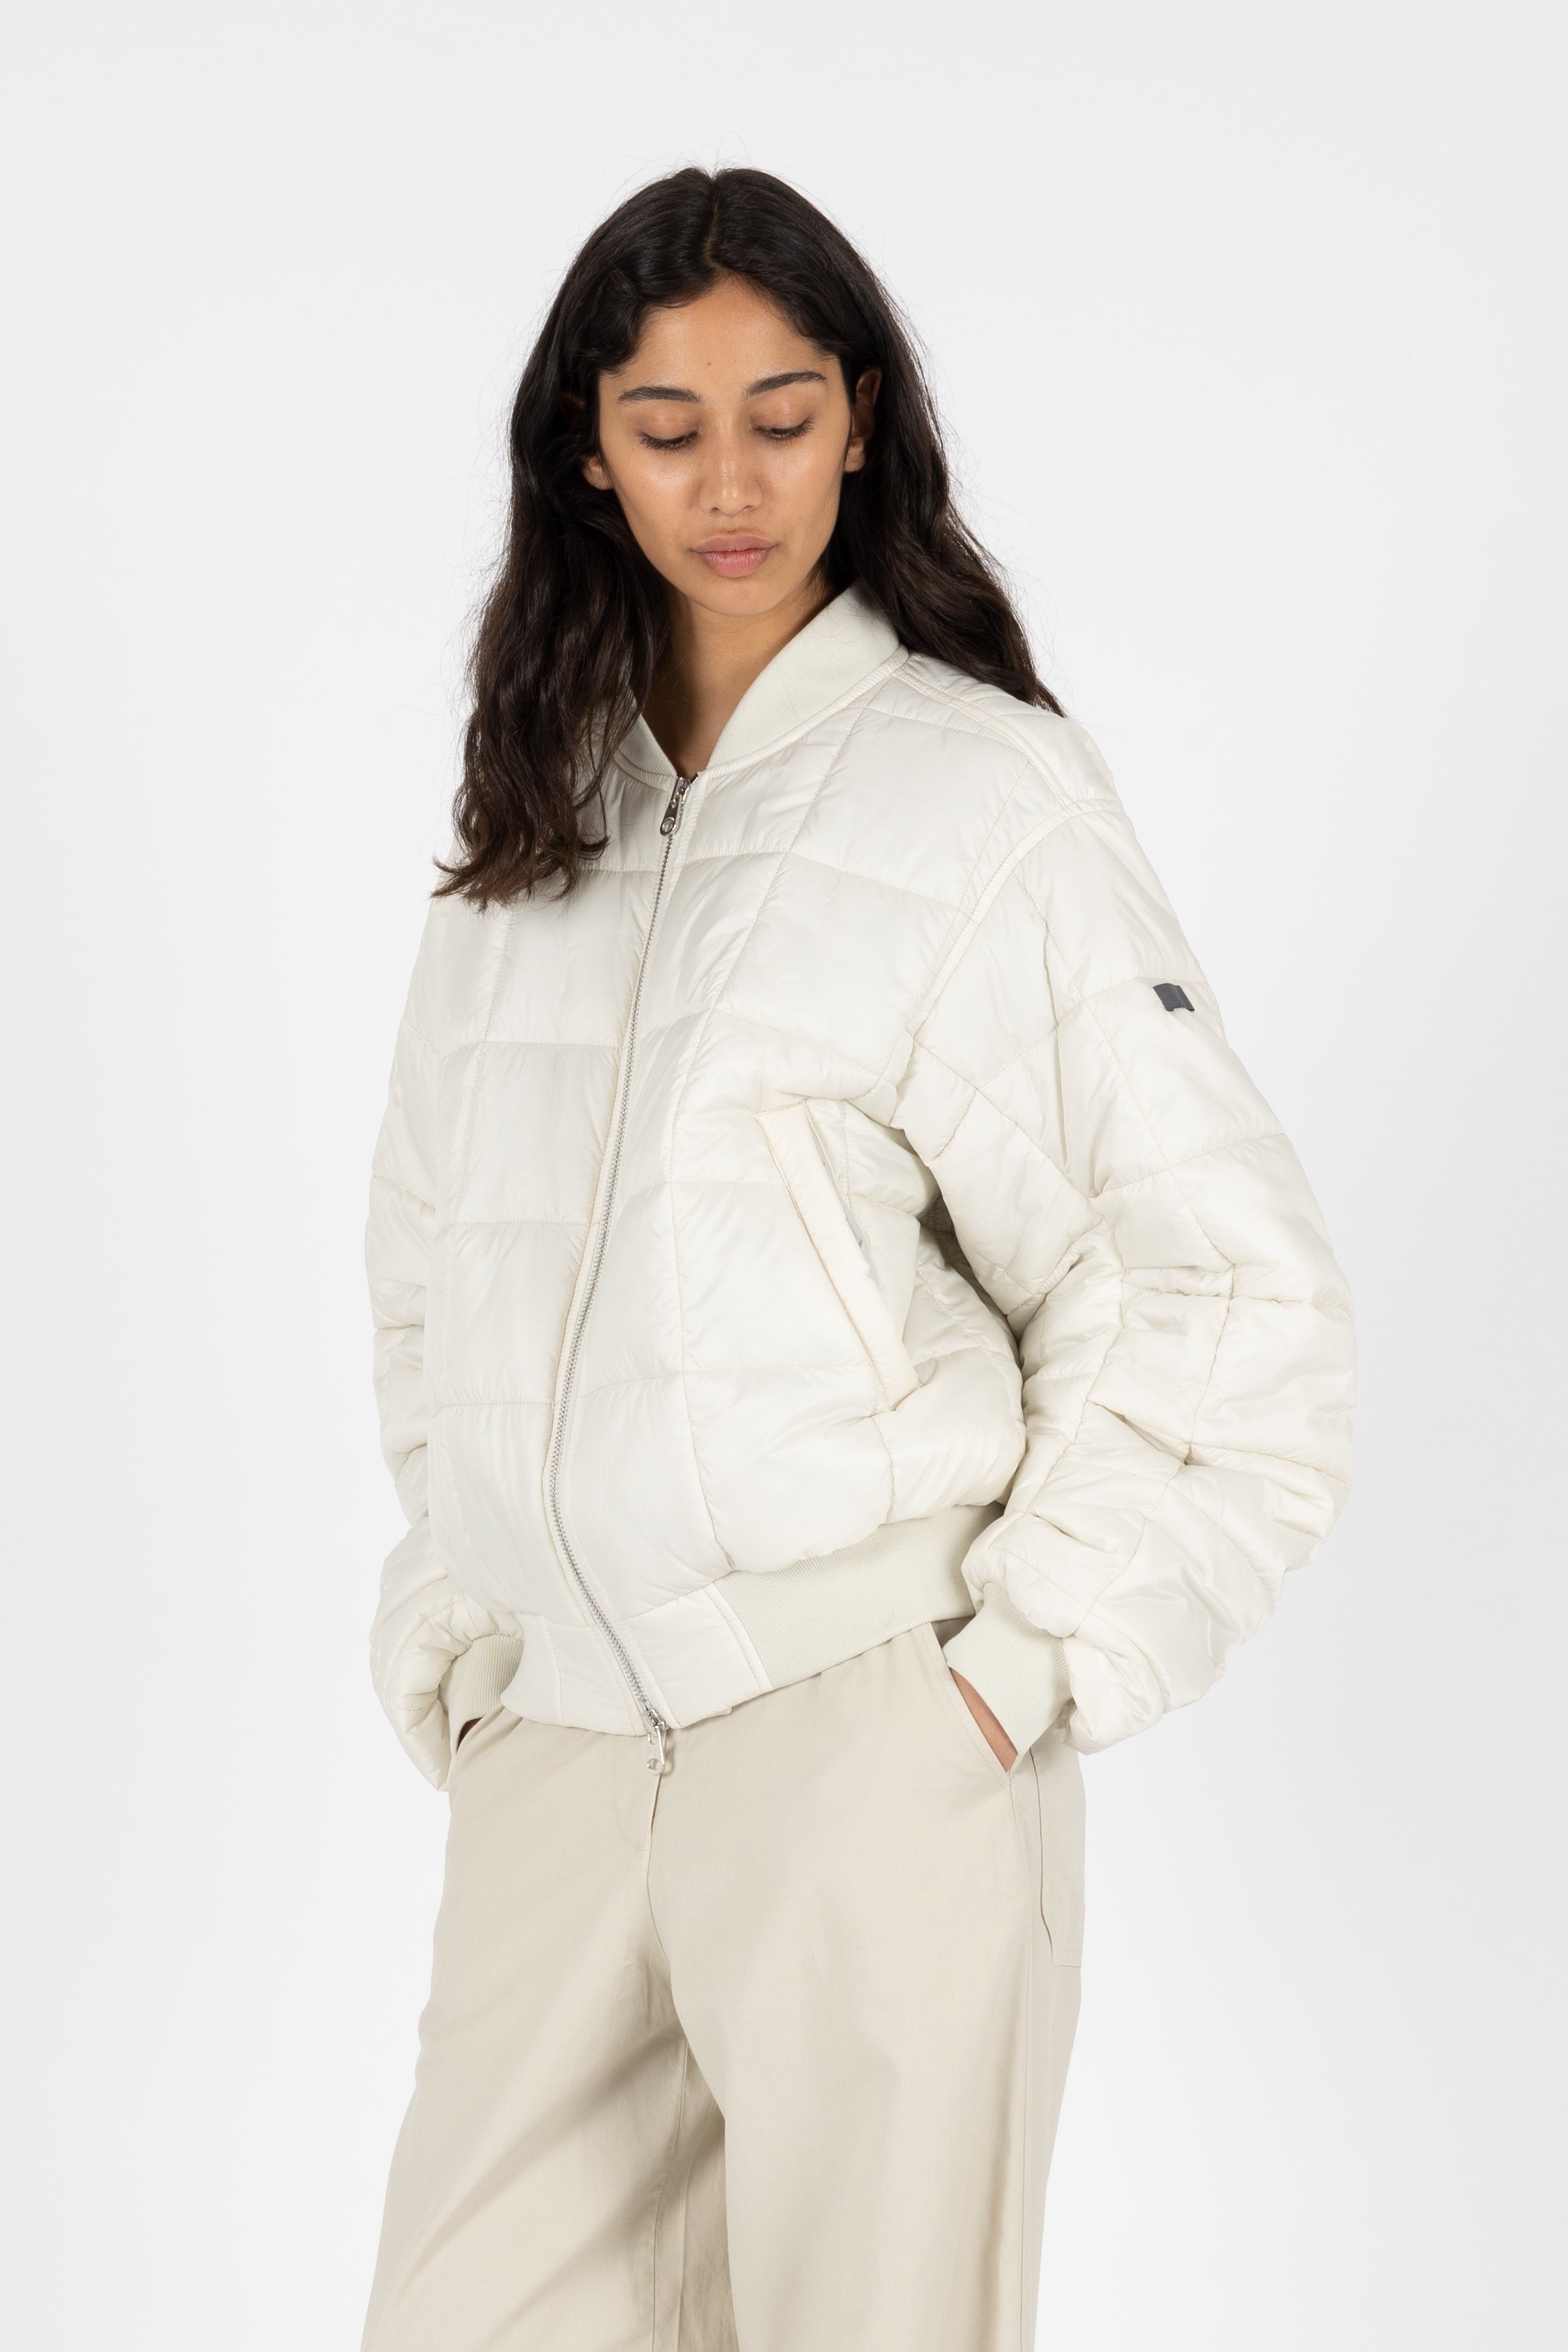 padded Box Quilt super lightweight bomber jacket in off white